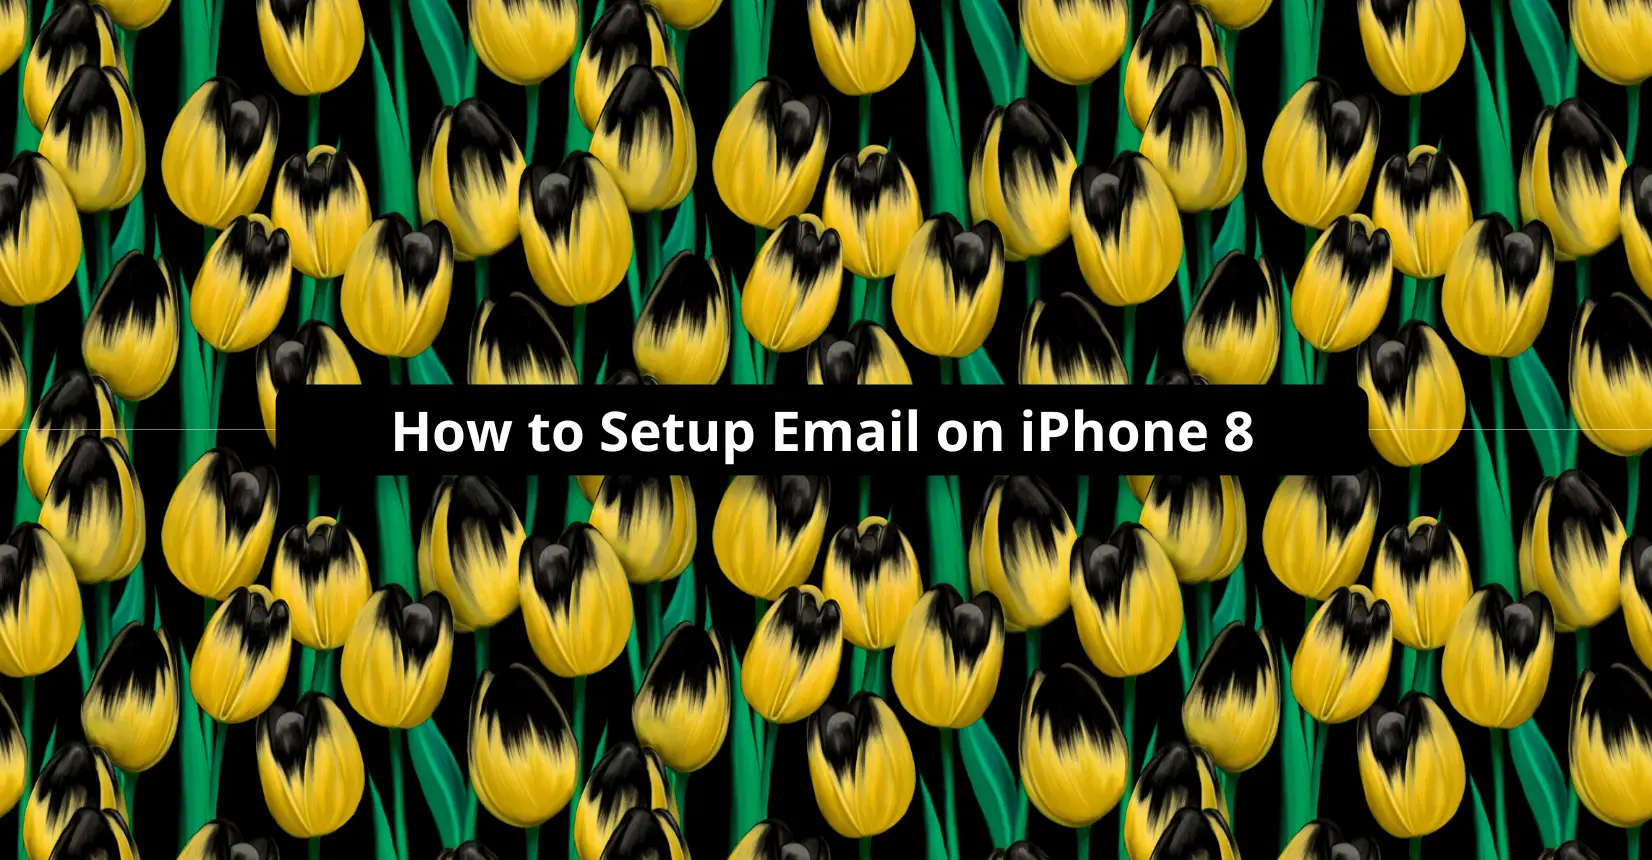 How to Setup Email on iPhone 8